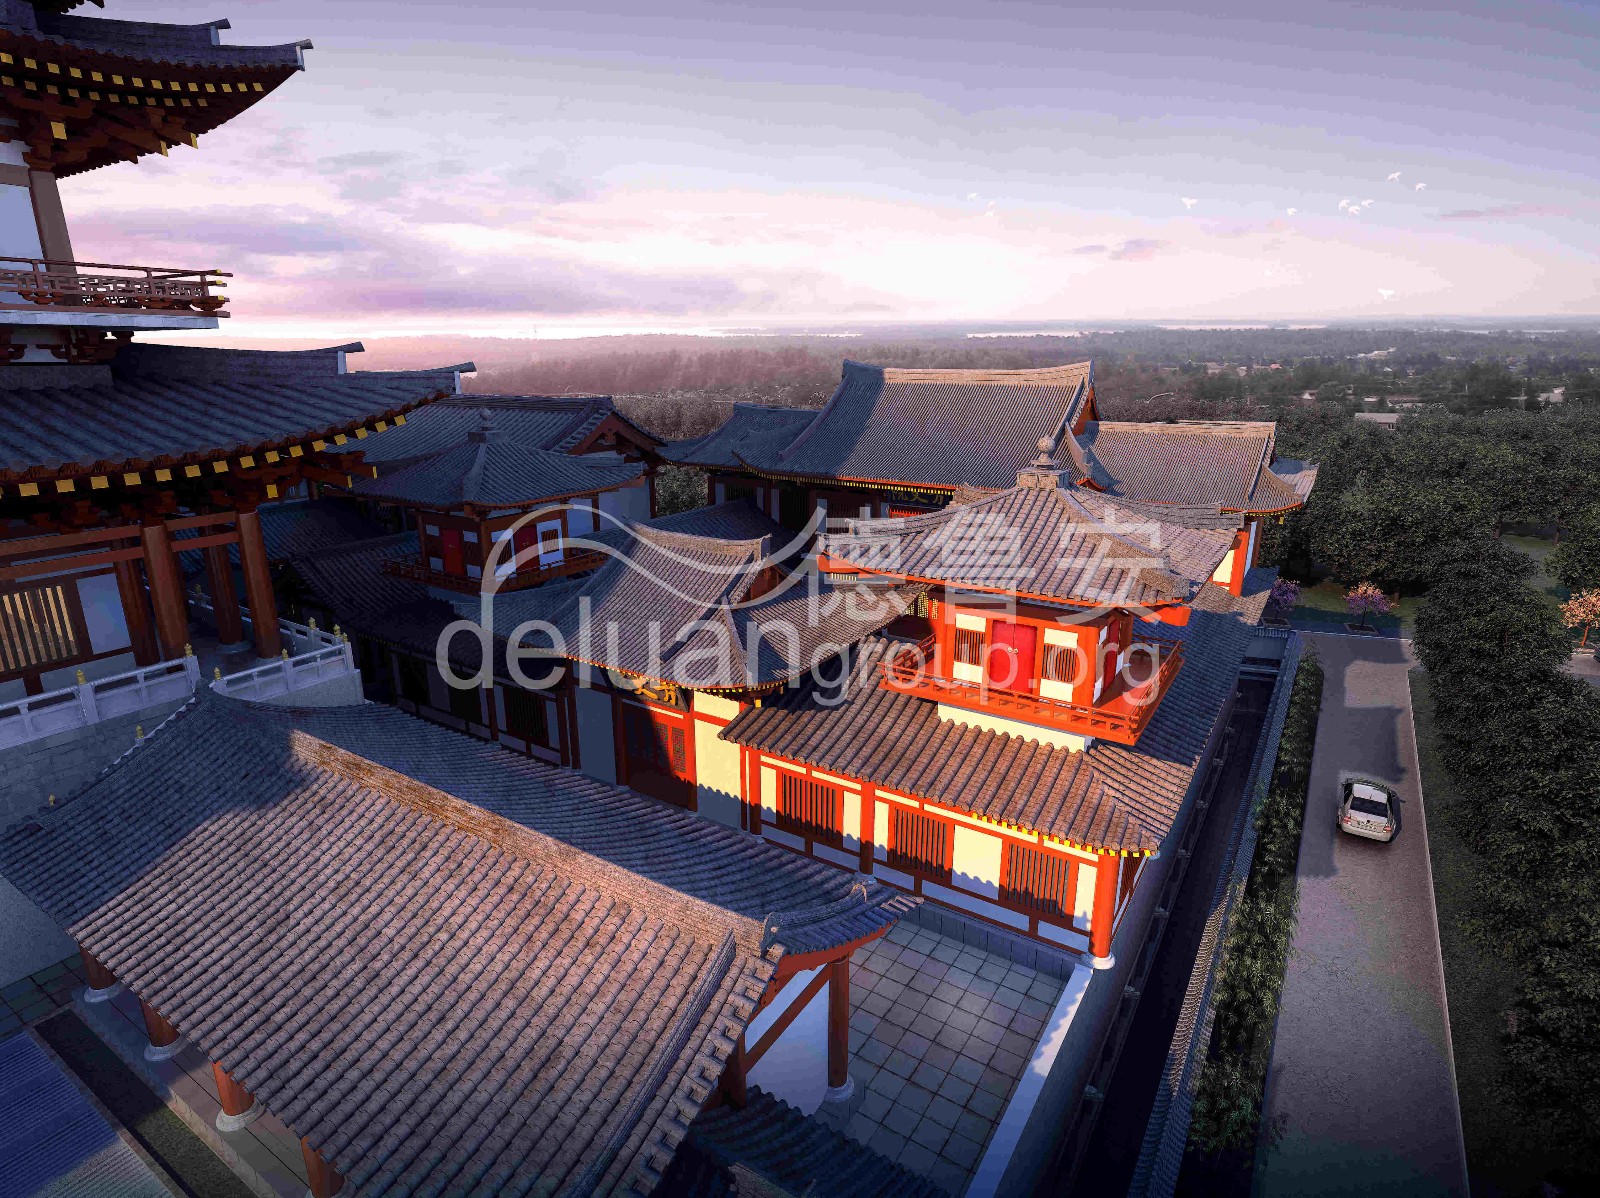 Planning and design of Baoqing temple in Xianghe(图16)